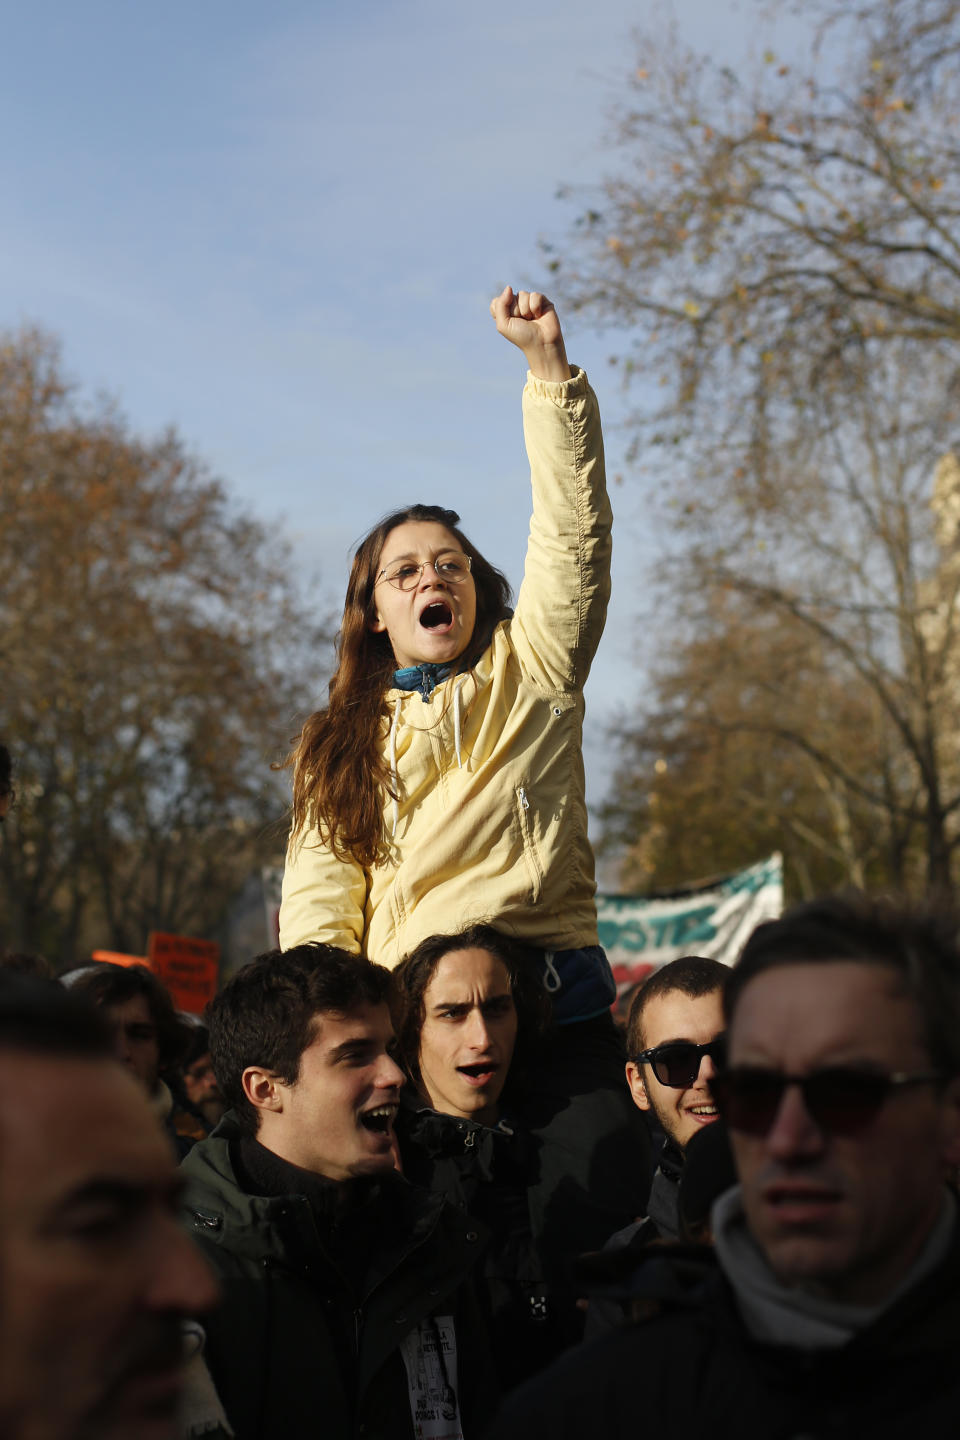 A woman clenches her fist during a demonstration Tuesday, Dec. 10, 2019 in Paris. French airport employees, teachers and other workers joined nationwide strikes Tuesday as unions cranked up pressure on the government to scrap upcoming changes to the country's national retirement system. (AP Photo/Thibault Camus)